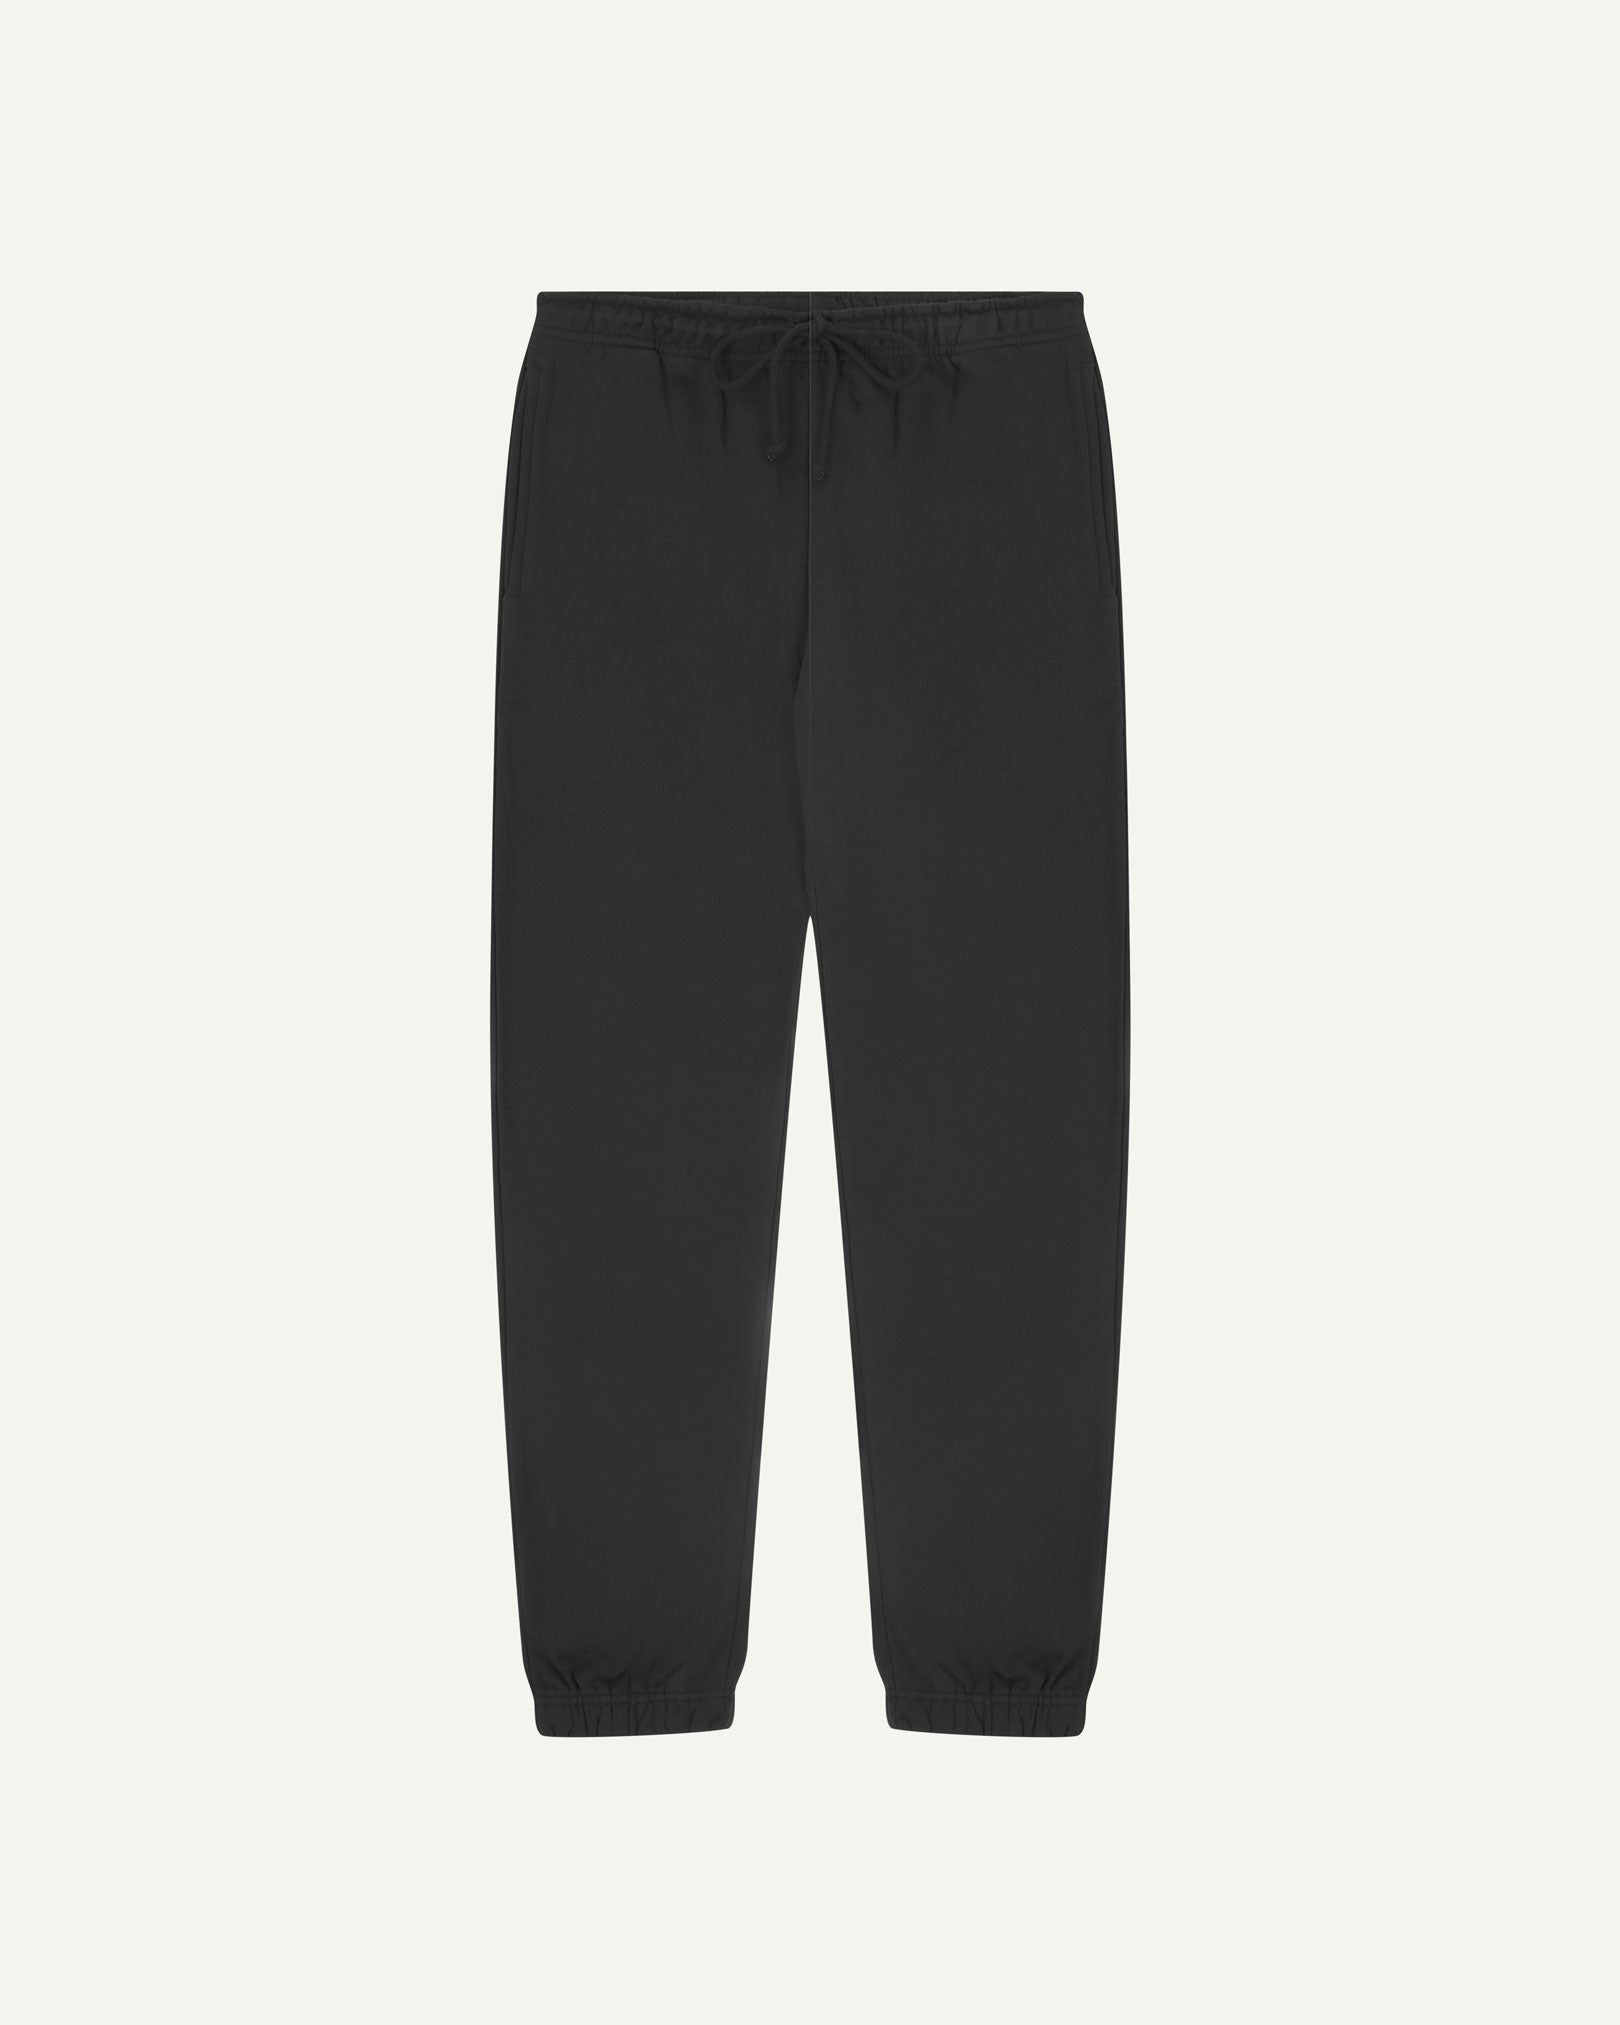 Front view of Uskees jogging pants in faded black organic cotton.